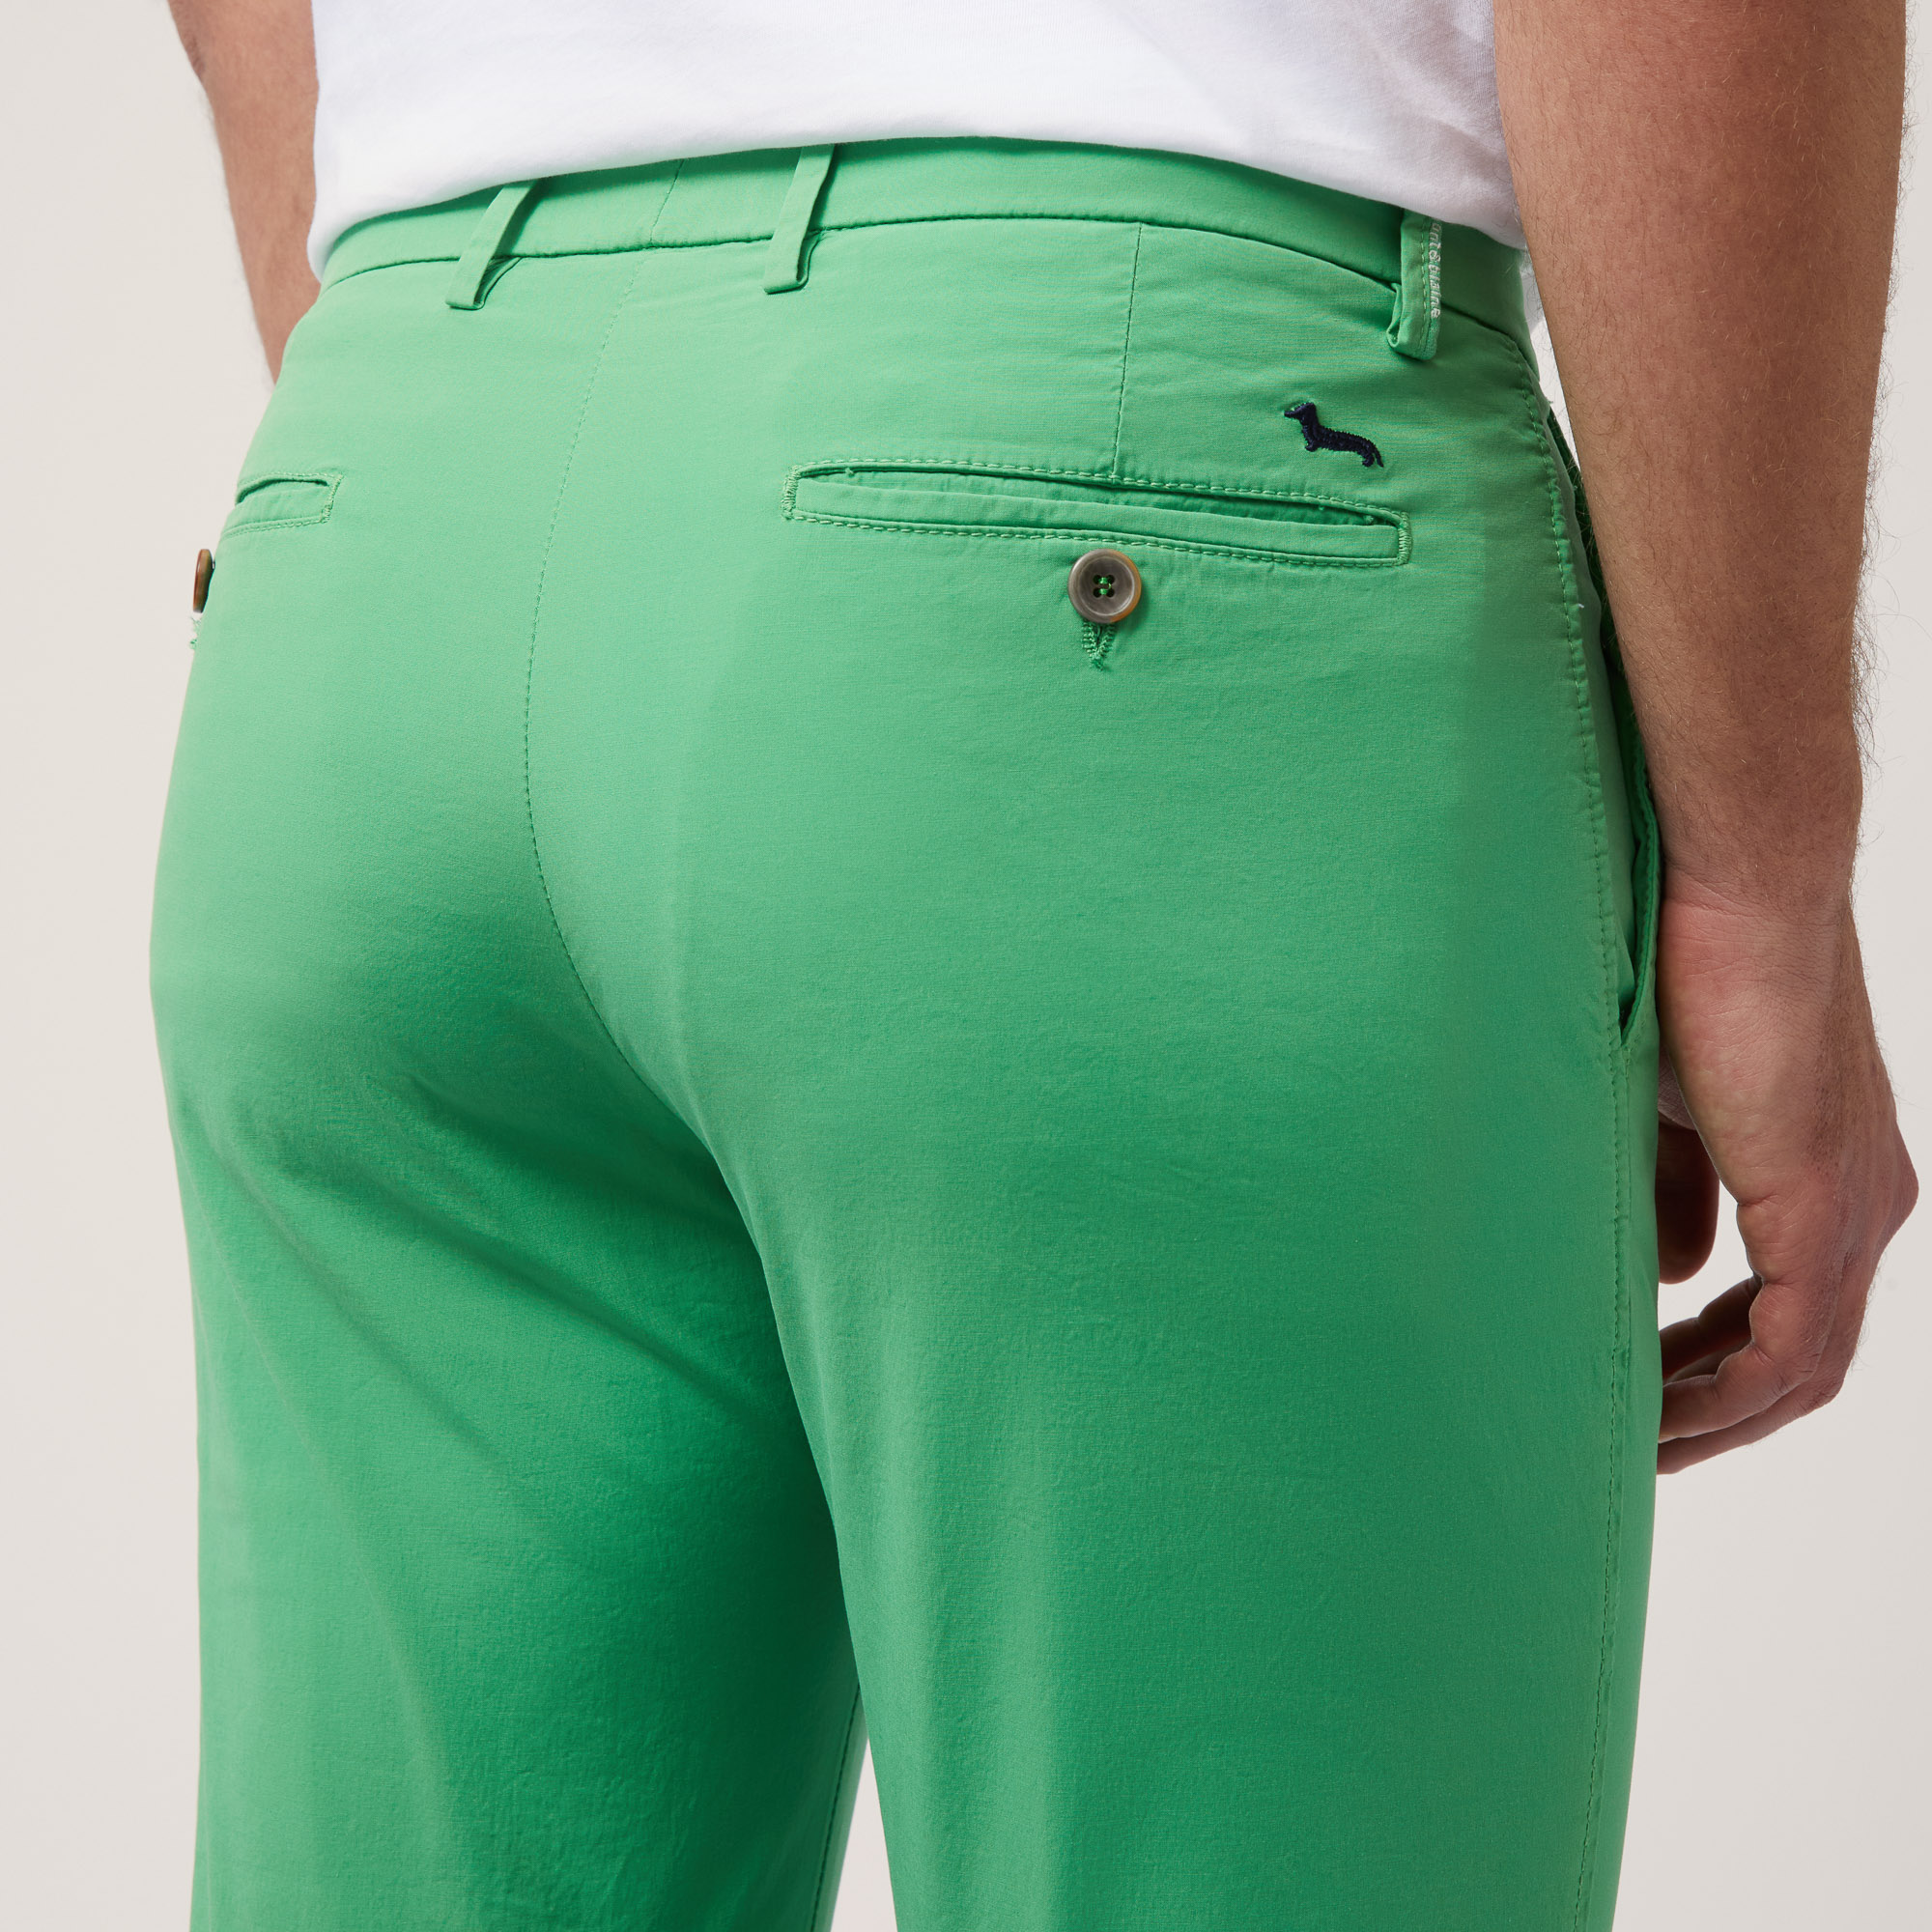 Narrow Fit Chino Pants, Herb, large image number 2